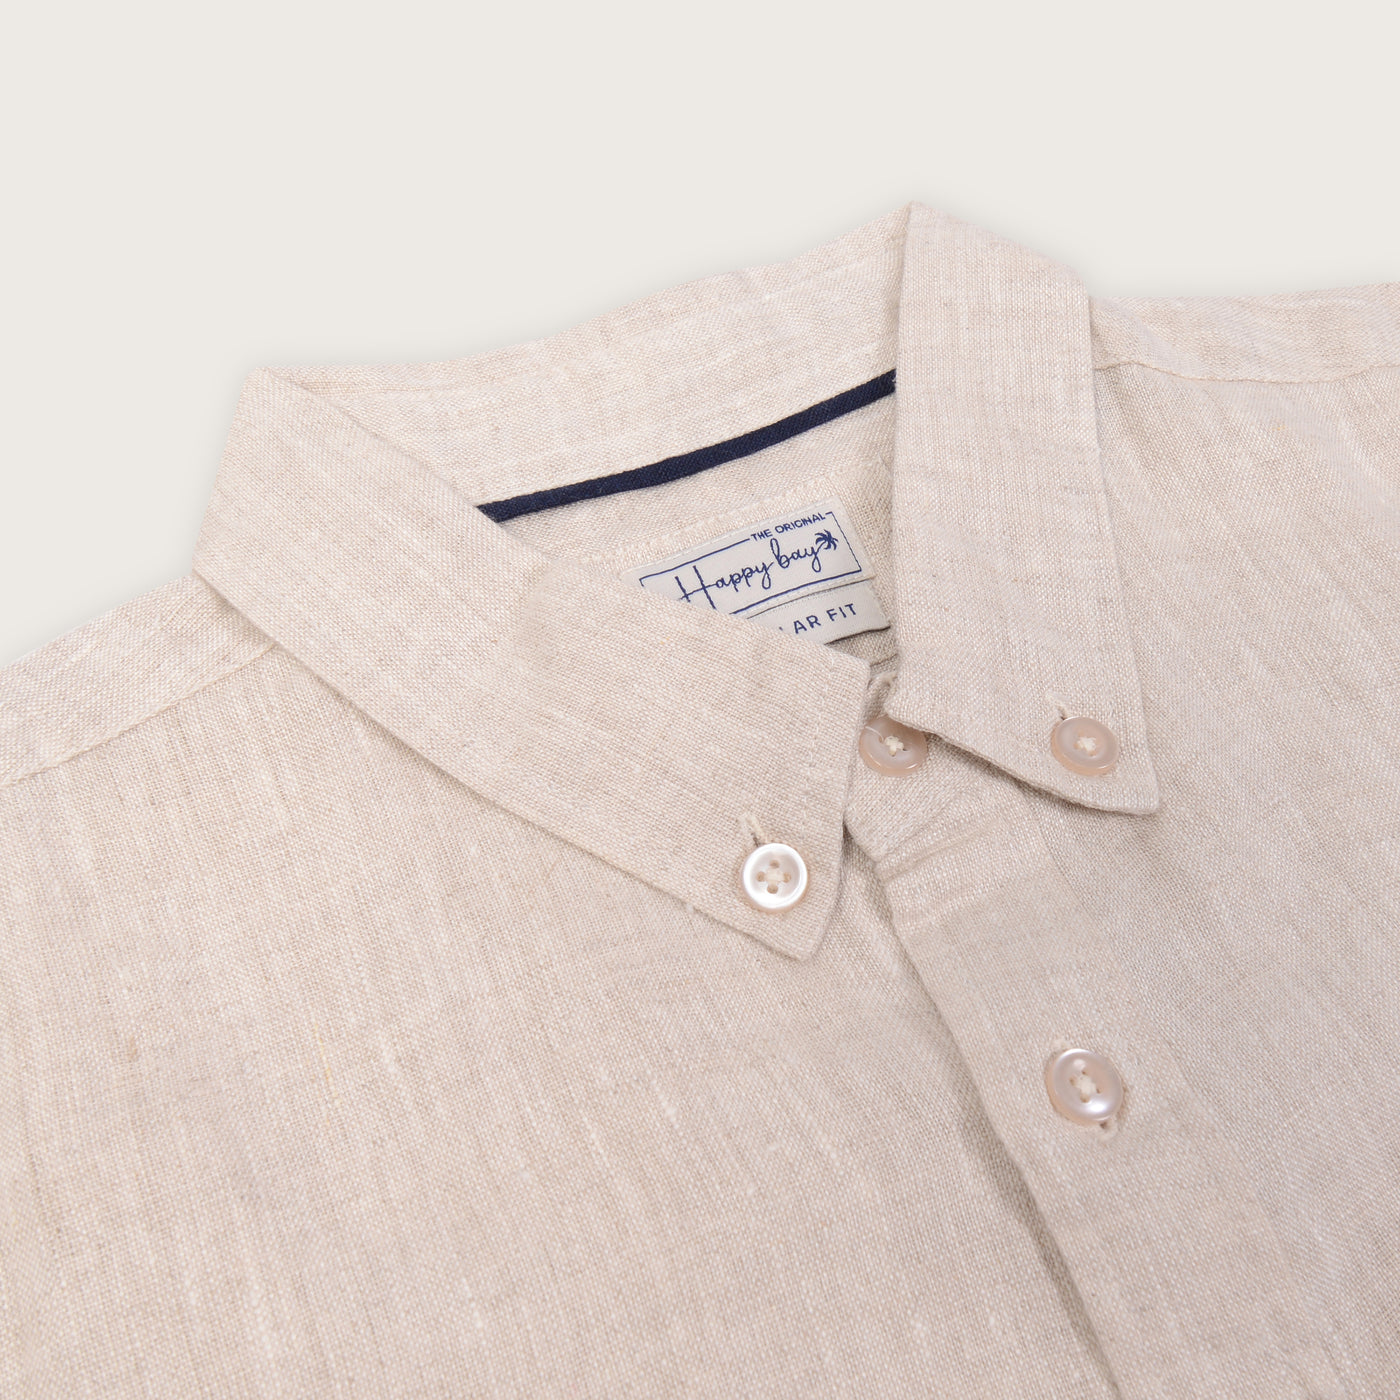 Pure Linen Pure Linen Life is rosy Shirt